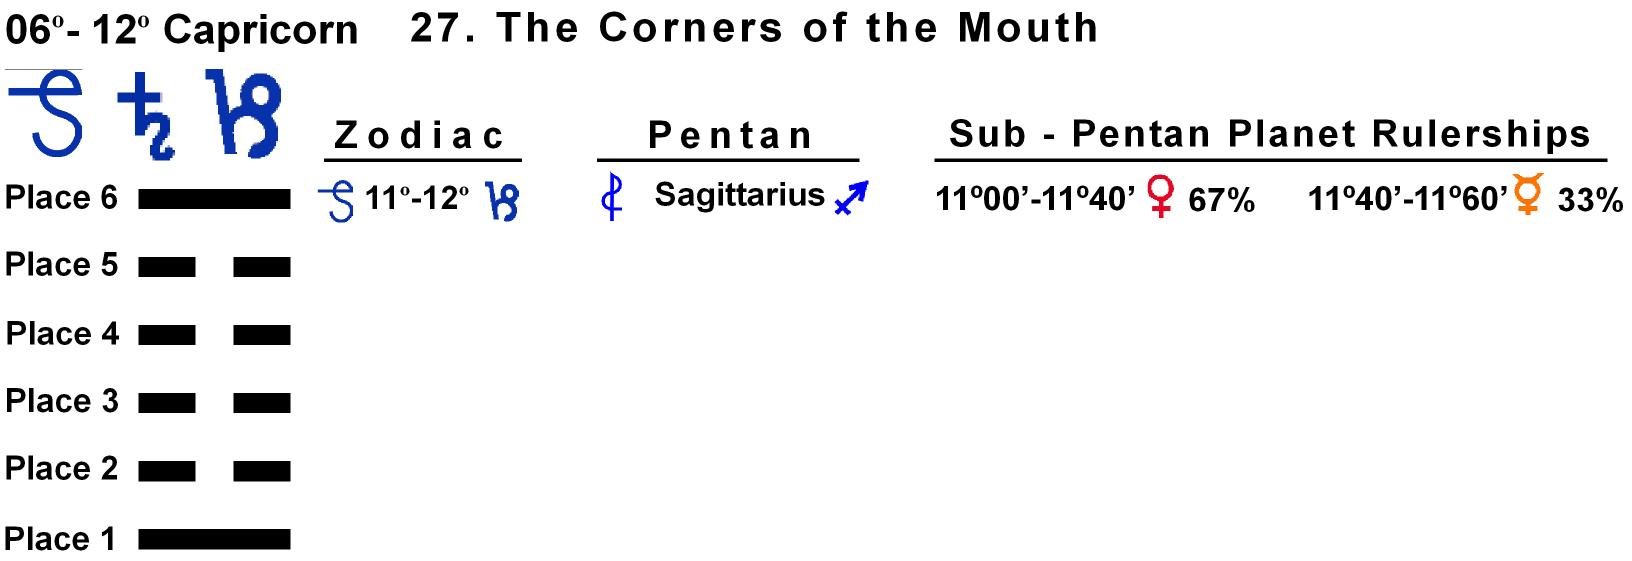 Pent-lines-10CP 11-12 Hx-27 Corners Of Mouth